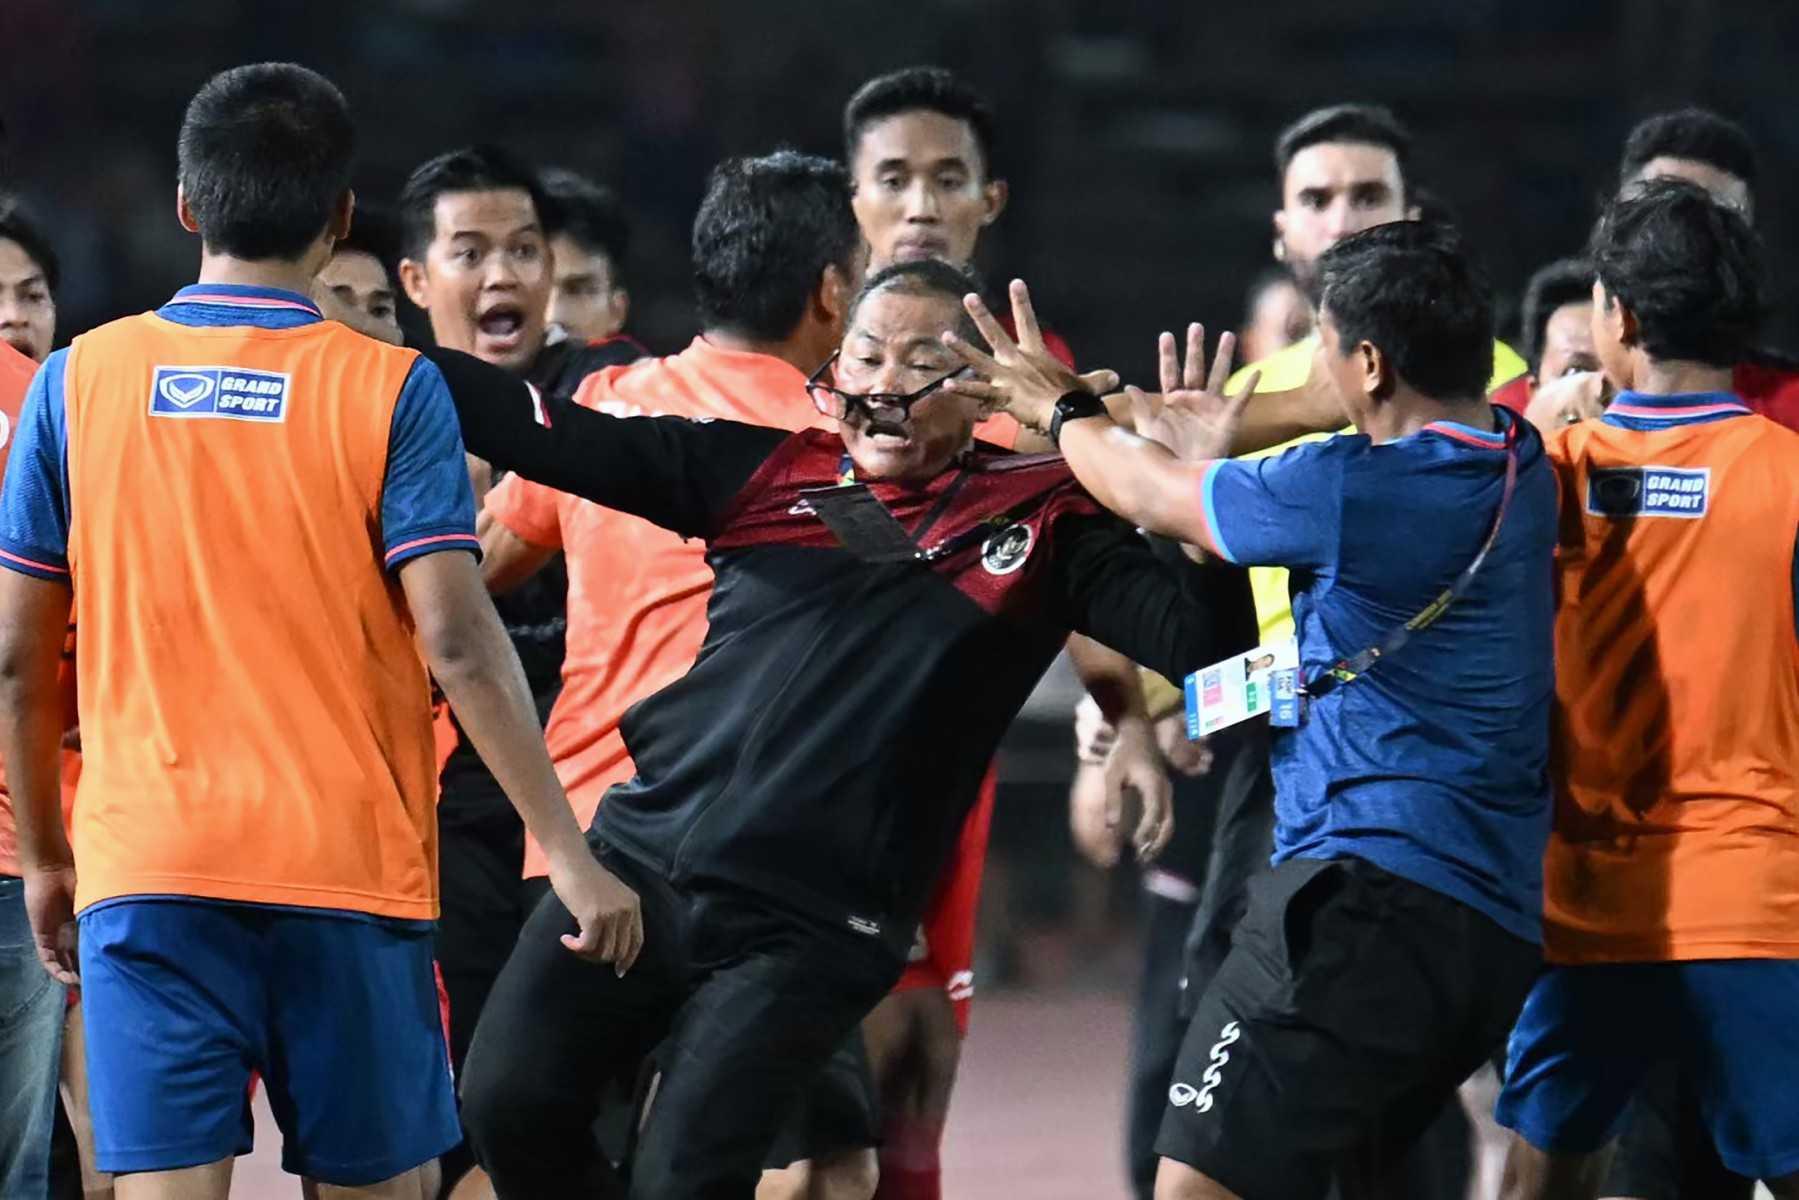 Players and officials react as a fight breaks out on the sidelines of the men's football final match between Thailand and Indonesia during the 32nd SEA Games in Phnom Penh on May 16. Photo: AFP